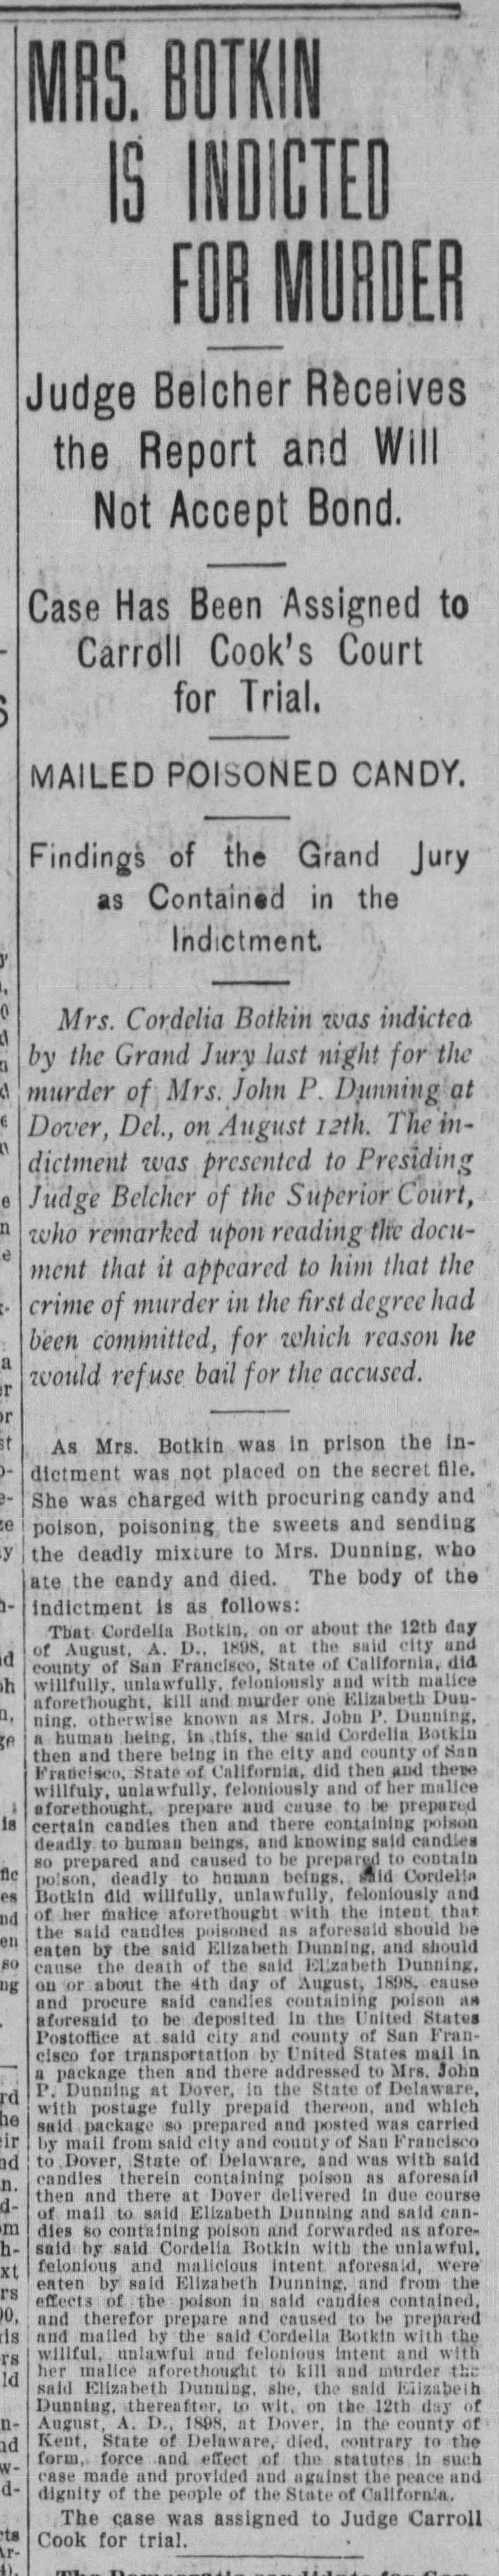 "Mrs. Botkin Is Indicted for Murder" "Judge Belcher Receives the Report and Will Not Accept Bond"